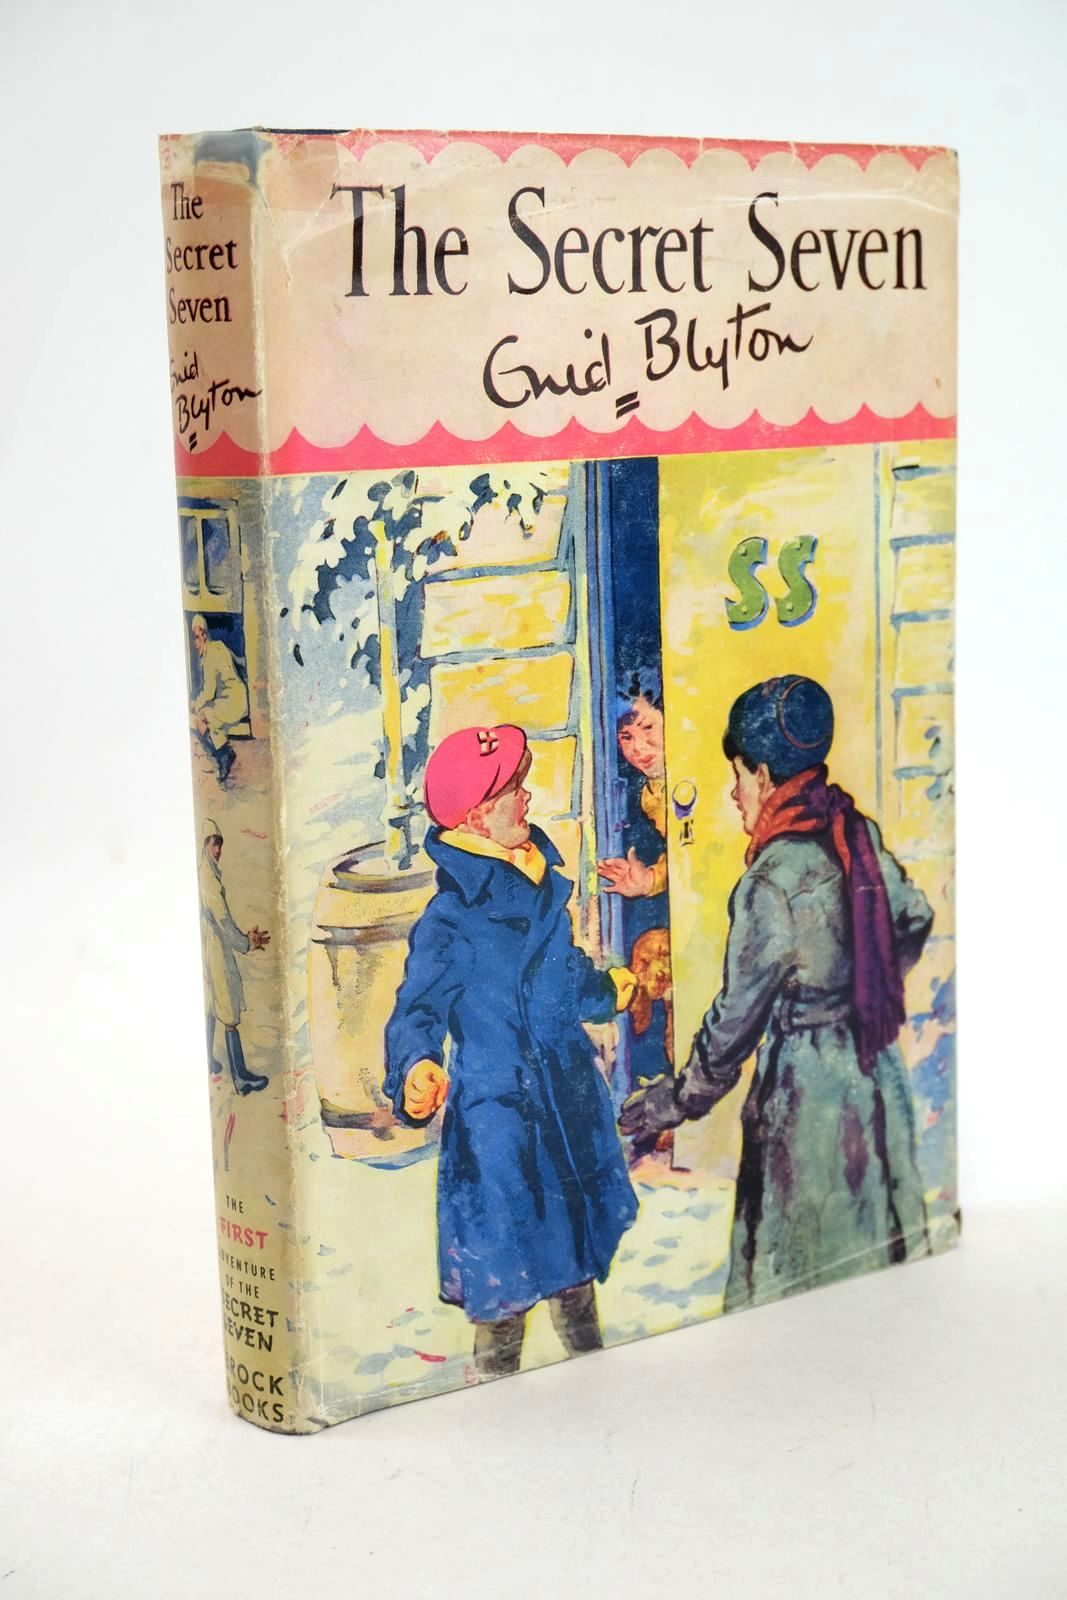 Photo of THE SECRET SEVEN written by Blyton, Enid illustrated by Brook, George published by Brockhampton Press Ltd. (STOCK CODE: 1326882)  for sale by Stella & Rose's Books